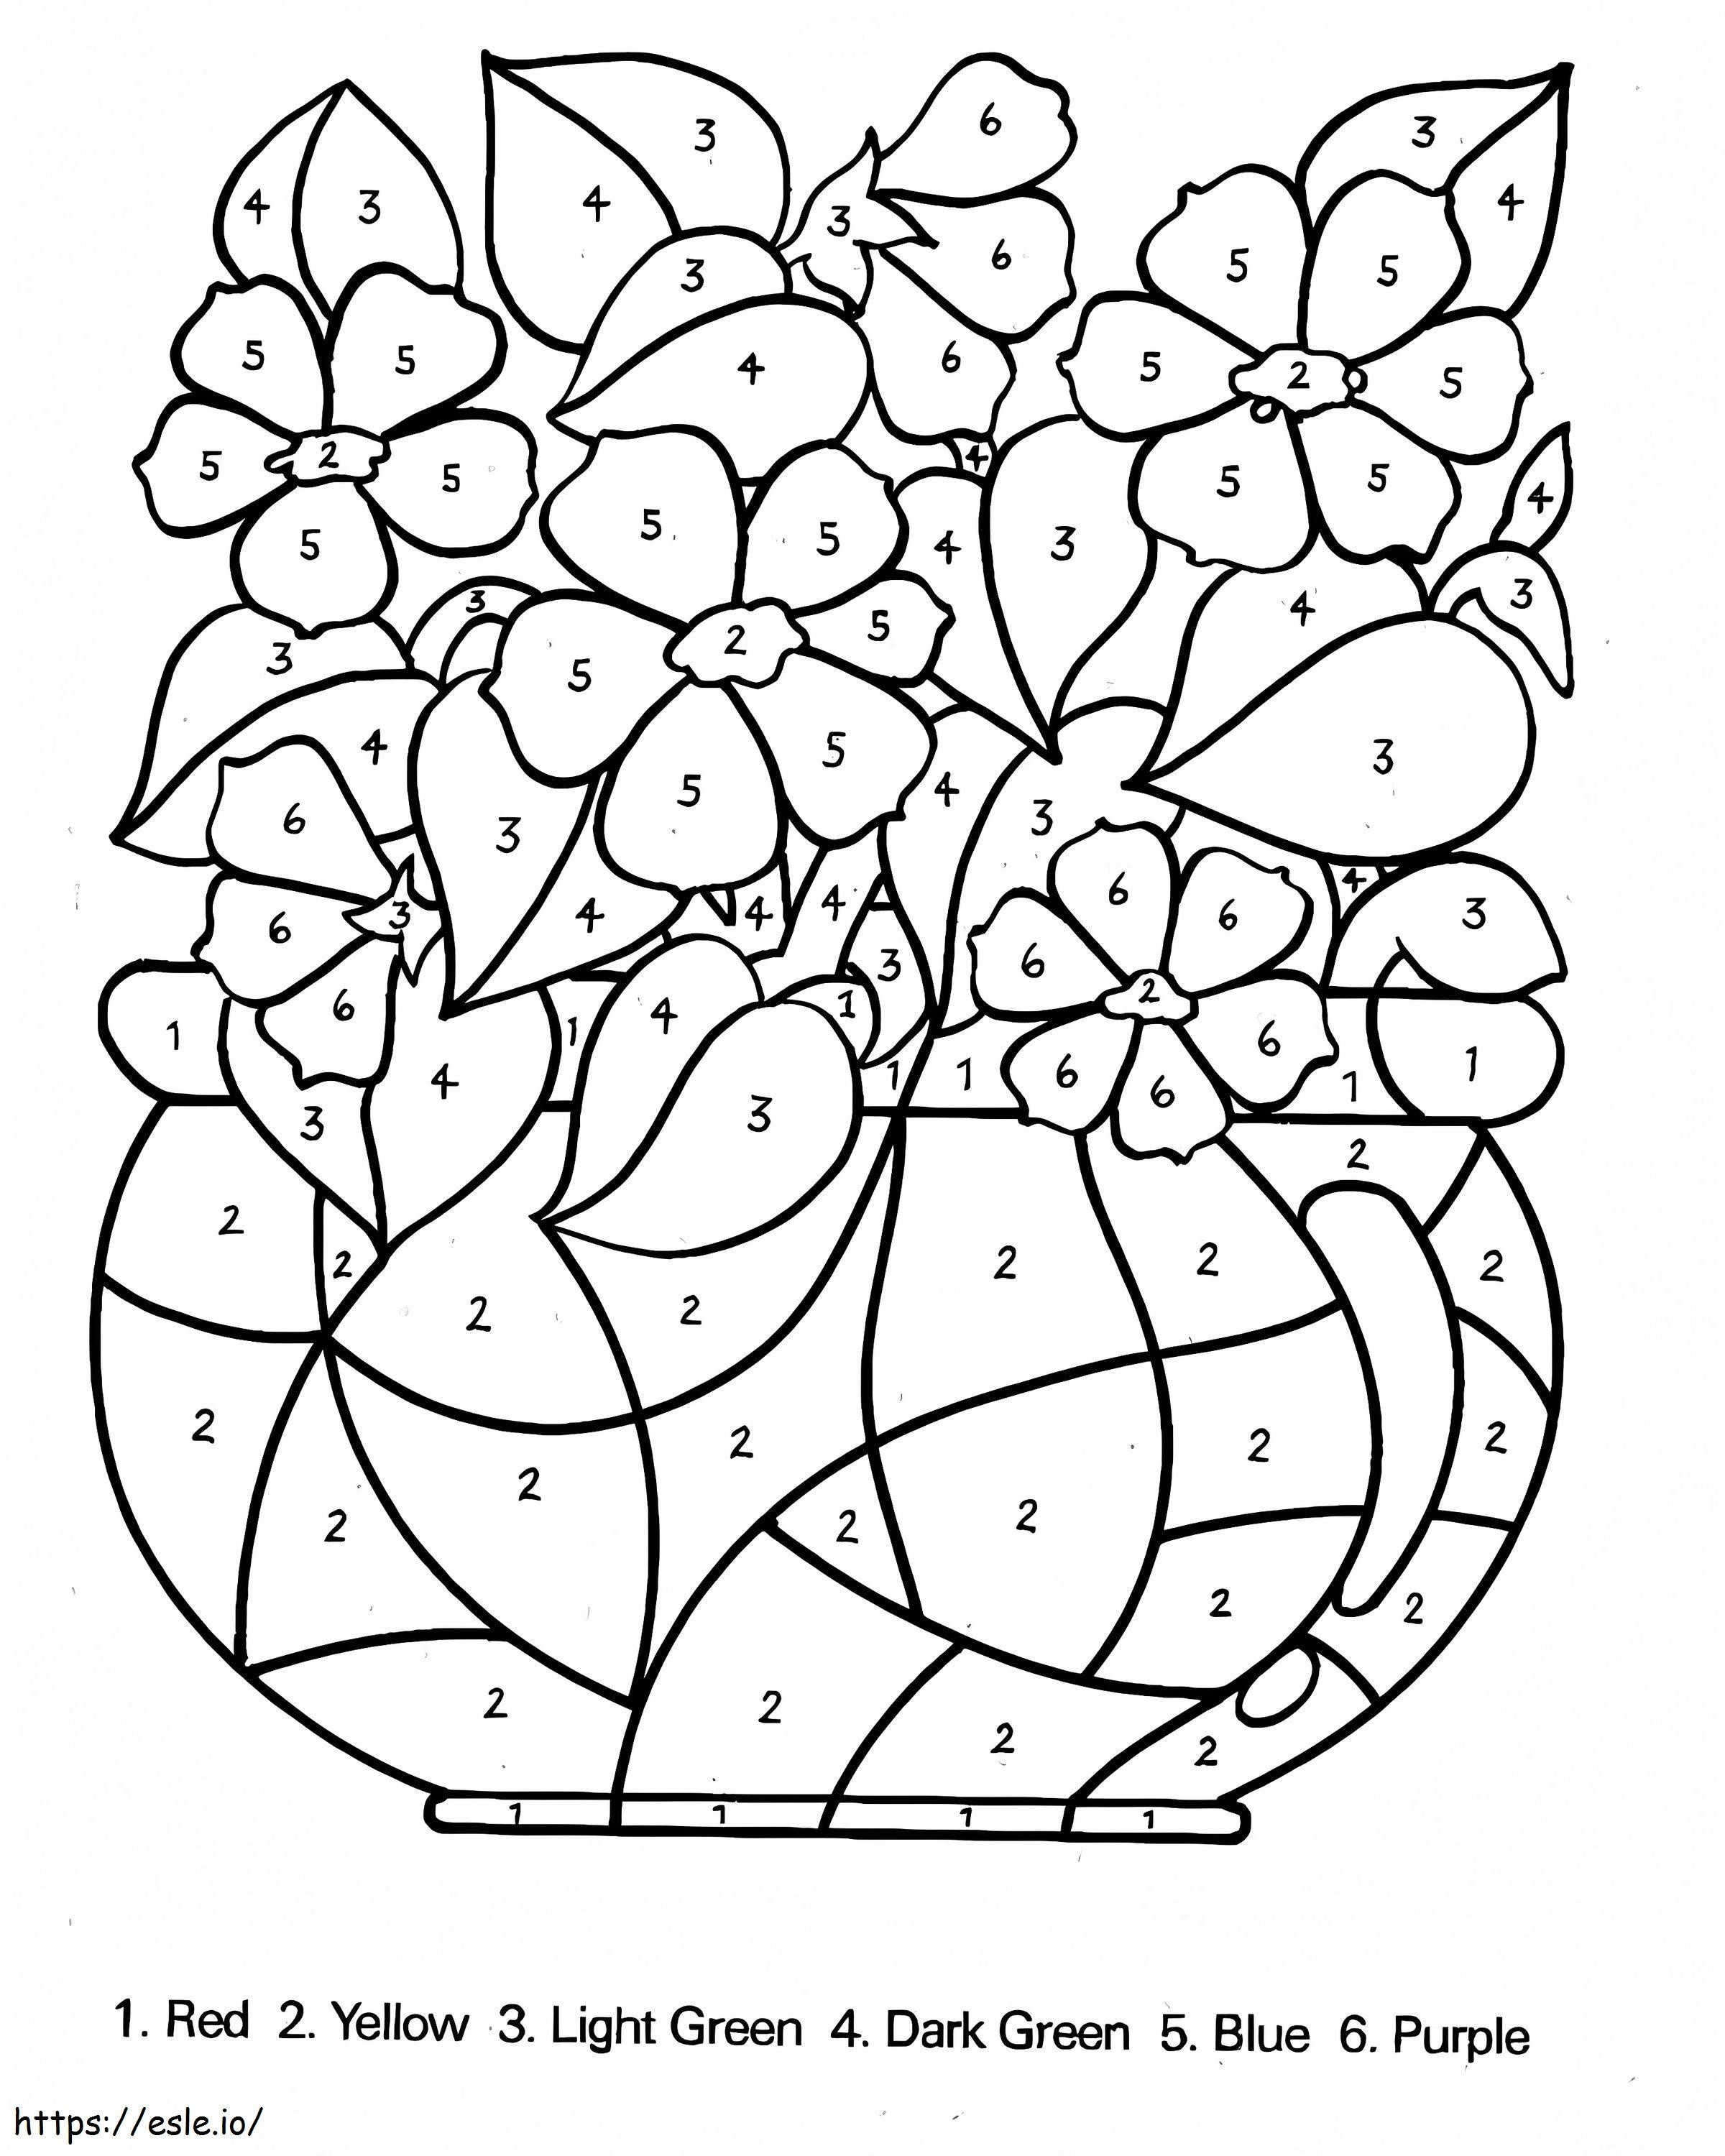 Flower Vase Color By Number coloring page